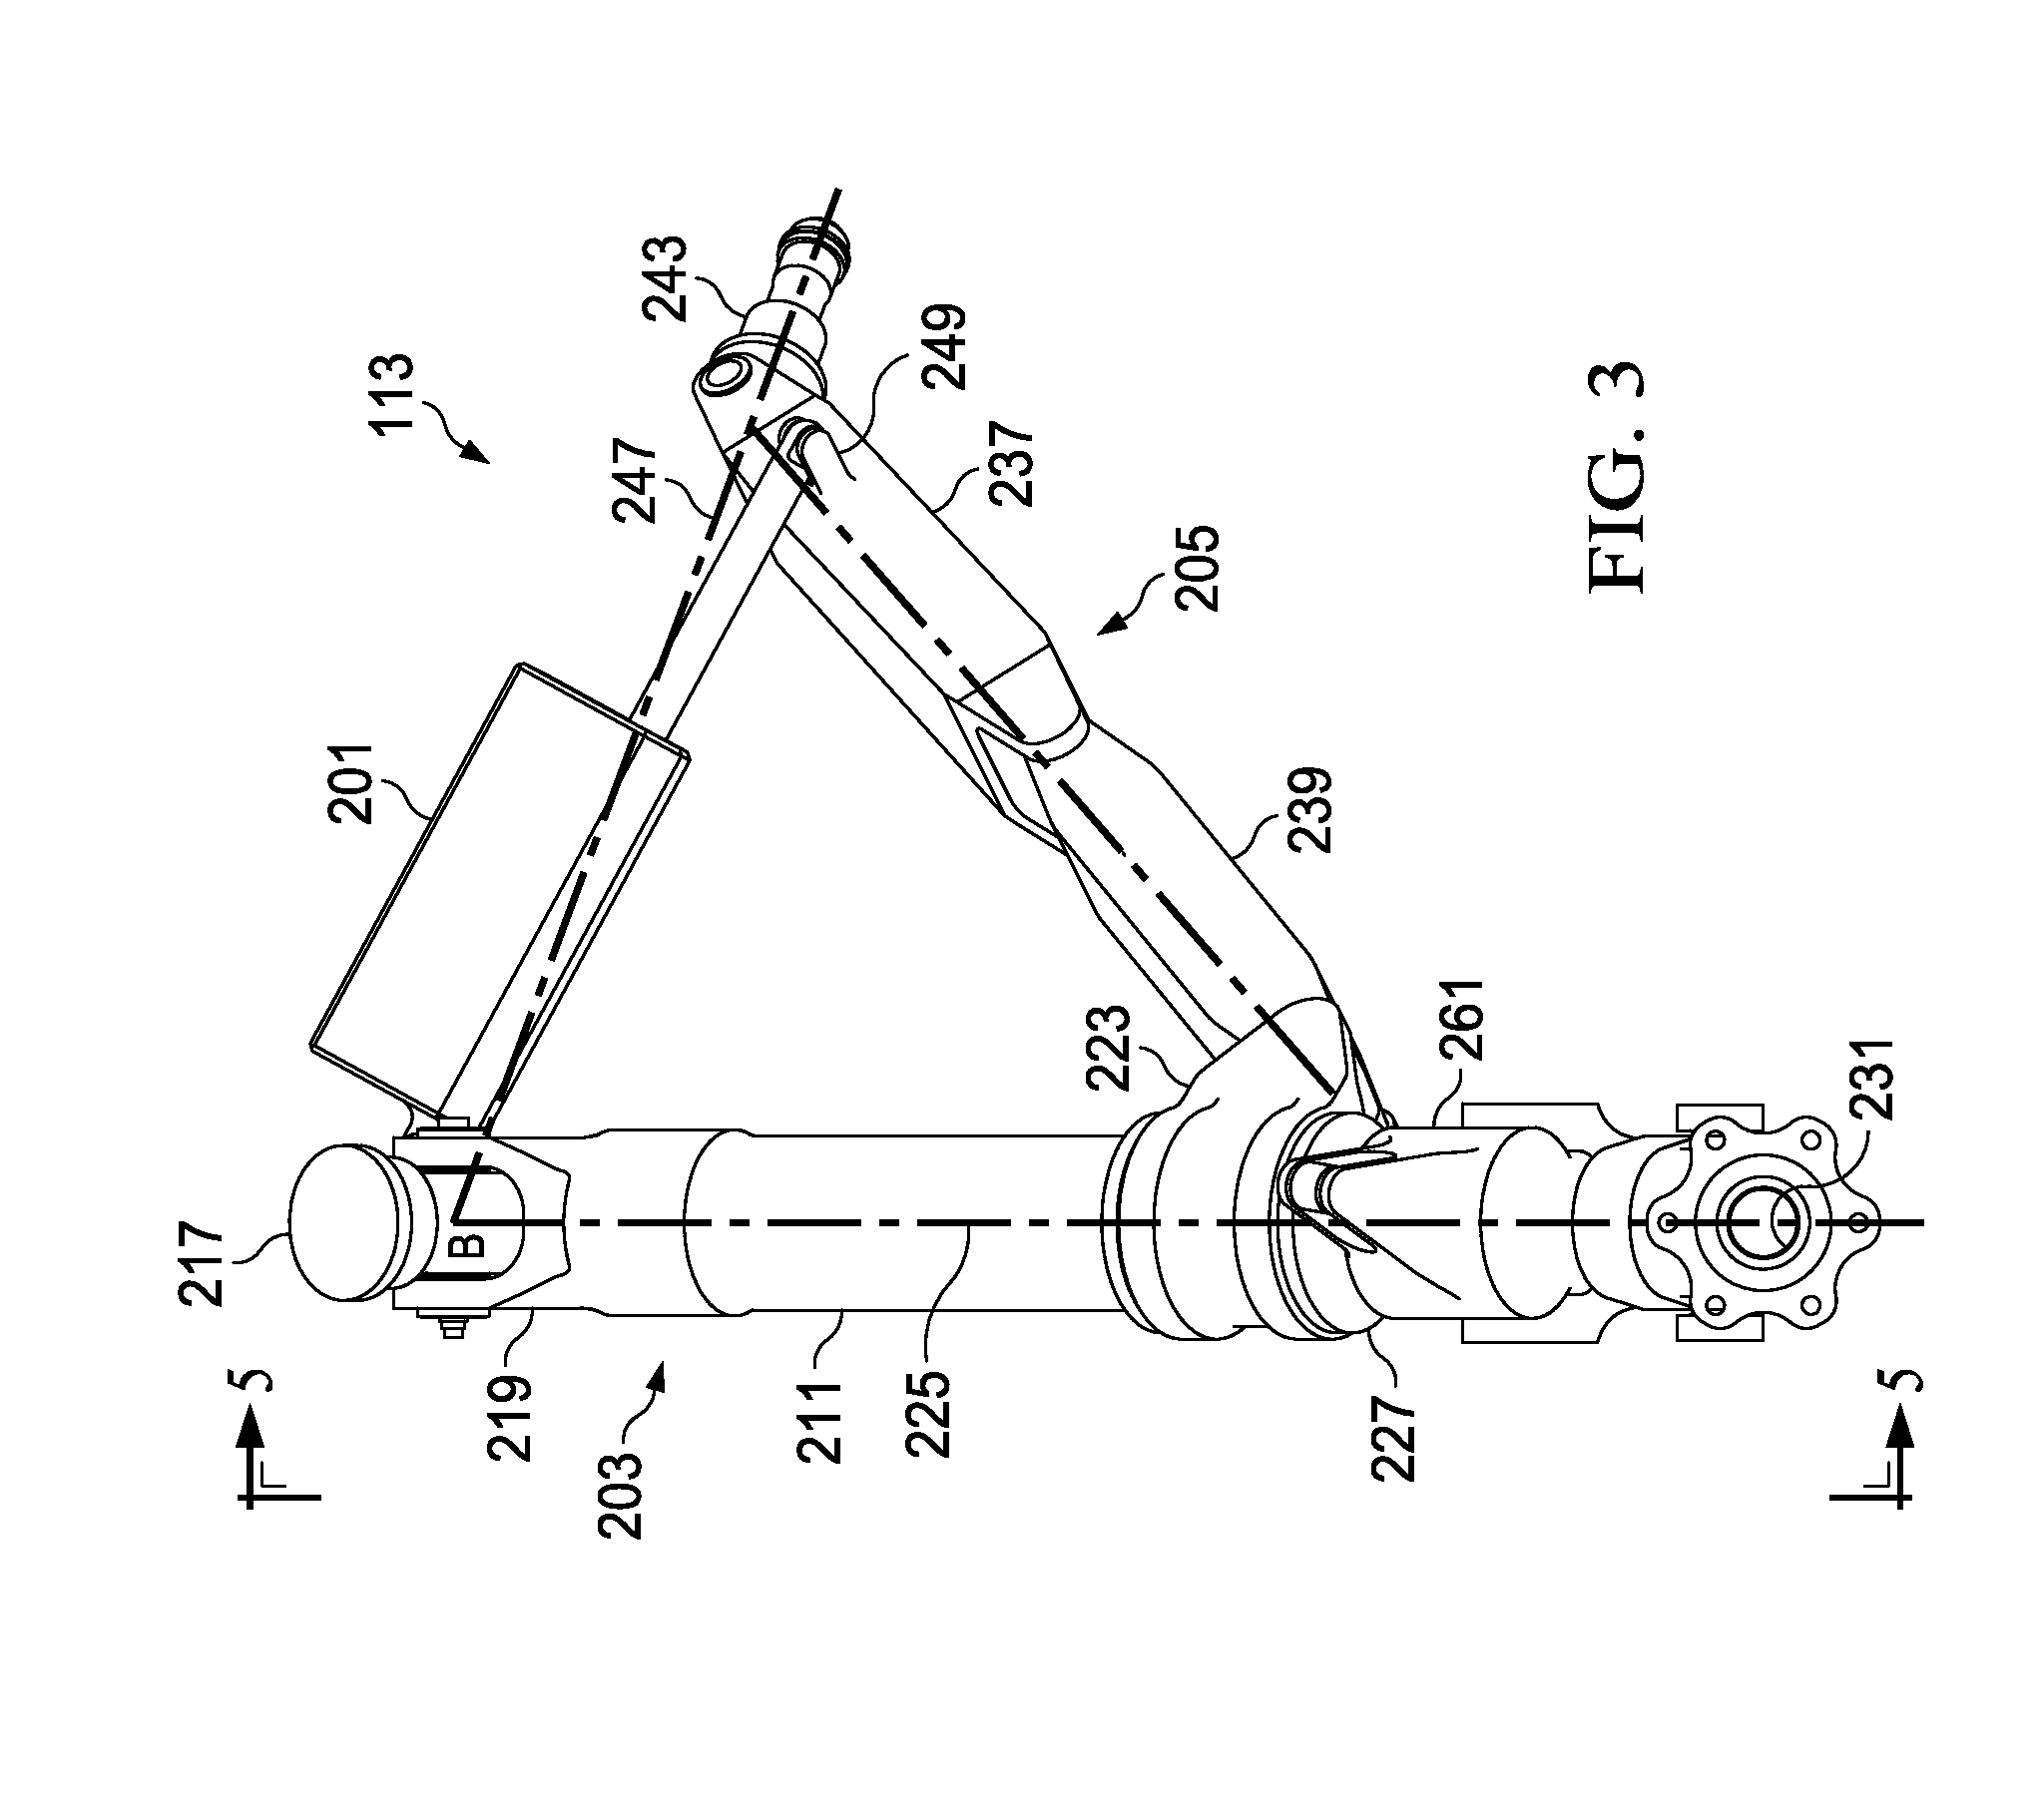 Semi-levered articulated landing gear system